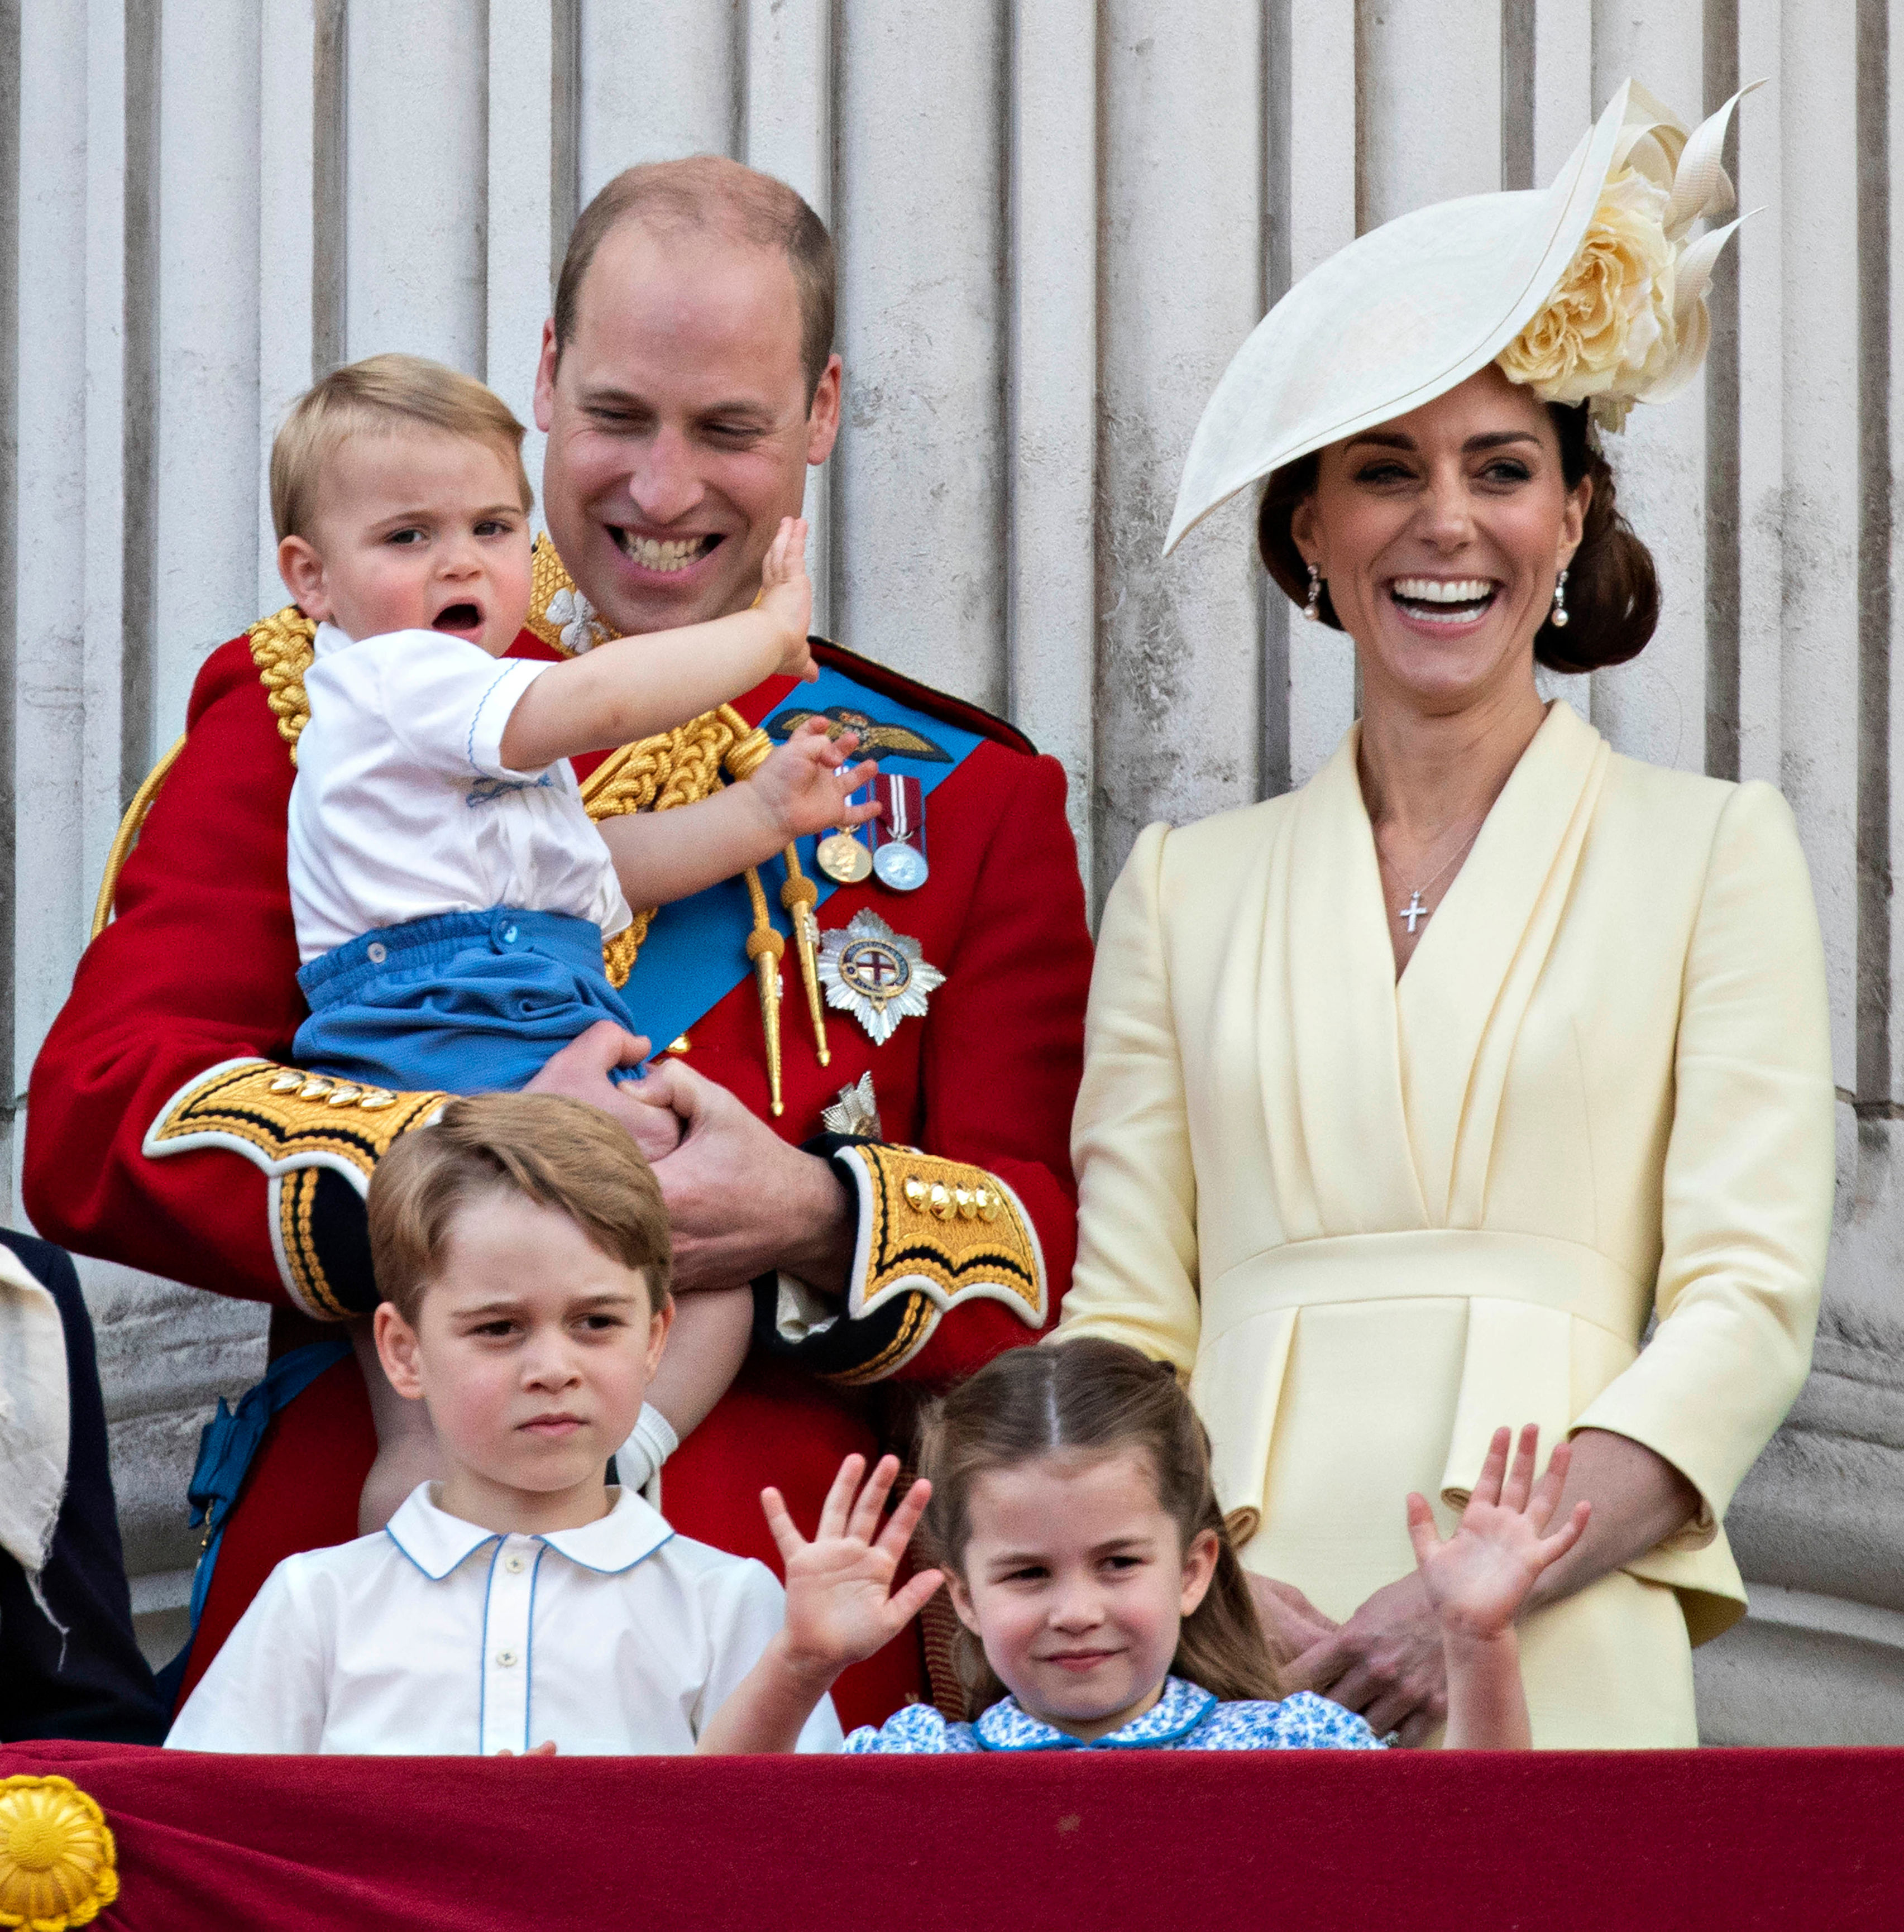 <p>Prince Louis, Prince George and Princess Charlotte celebrated <a href="https://www.wonderwall.com/celebrity/trooping-colour-2019-see-british-royal-family-queens-annual-birthday-celebration-3019935.gallery">Trooping the Colour</a> (it was Louis' first!) with Mum and Dad on the balcony at Buckingham Palace in London on June 8, 2019.</p>